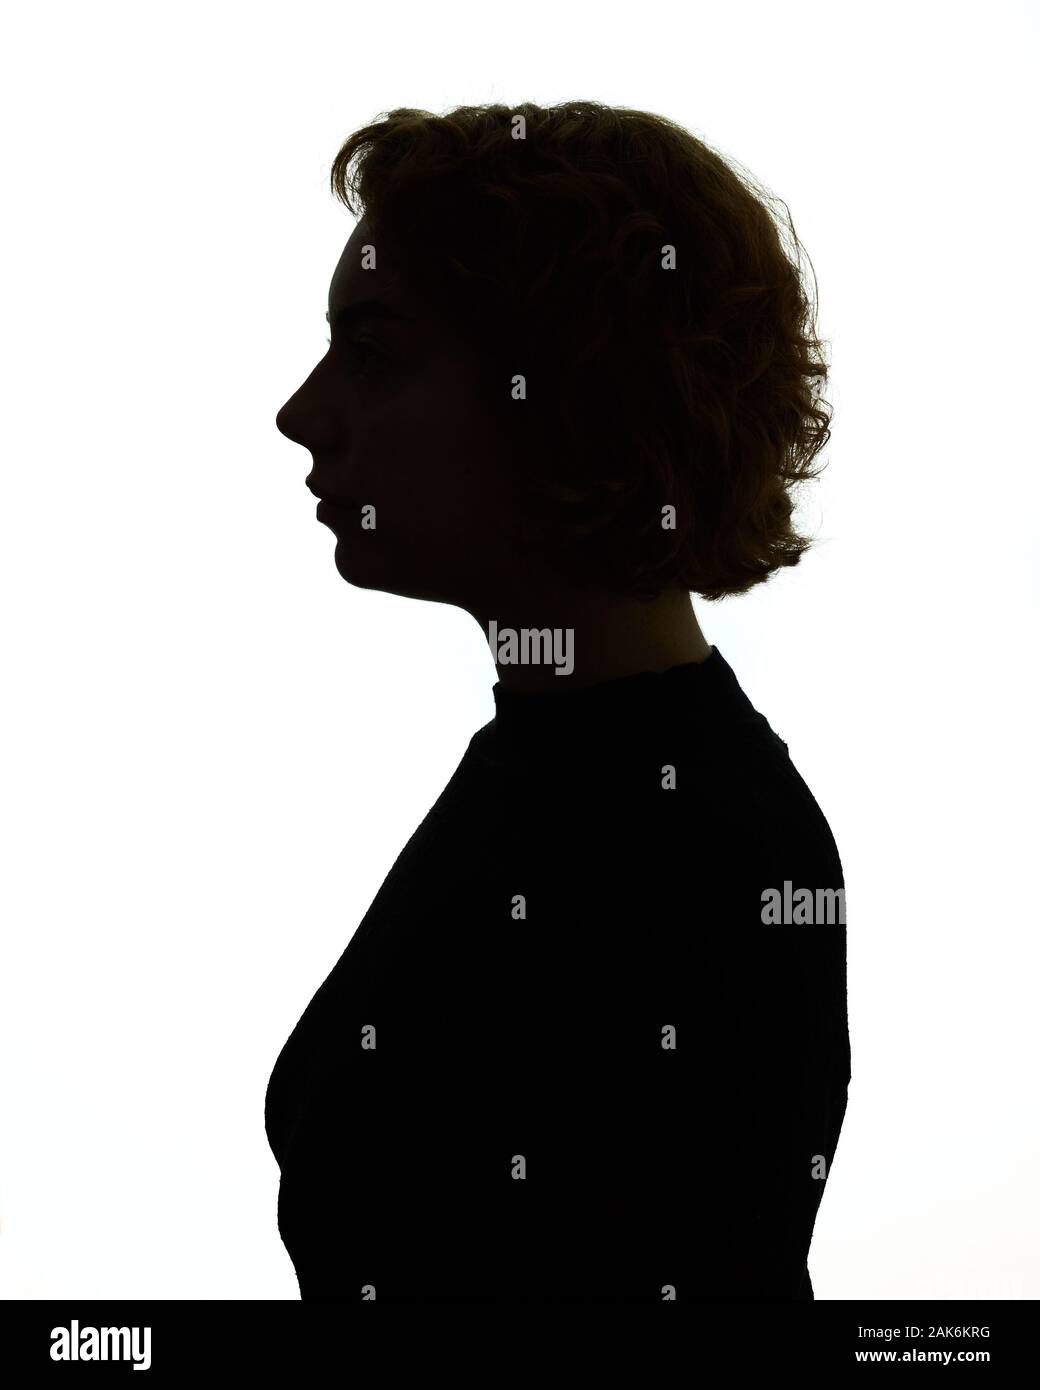 Silhouette of head and shoulders of a woman, backlit. Stock Photo